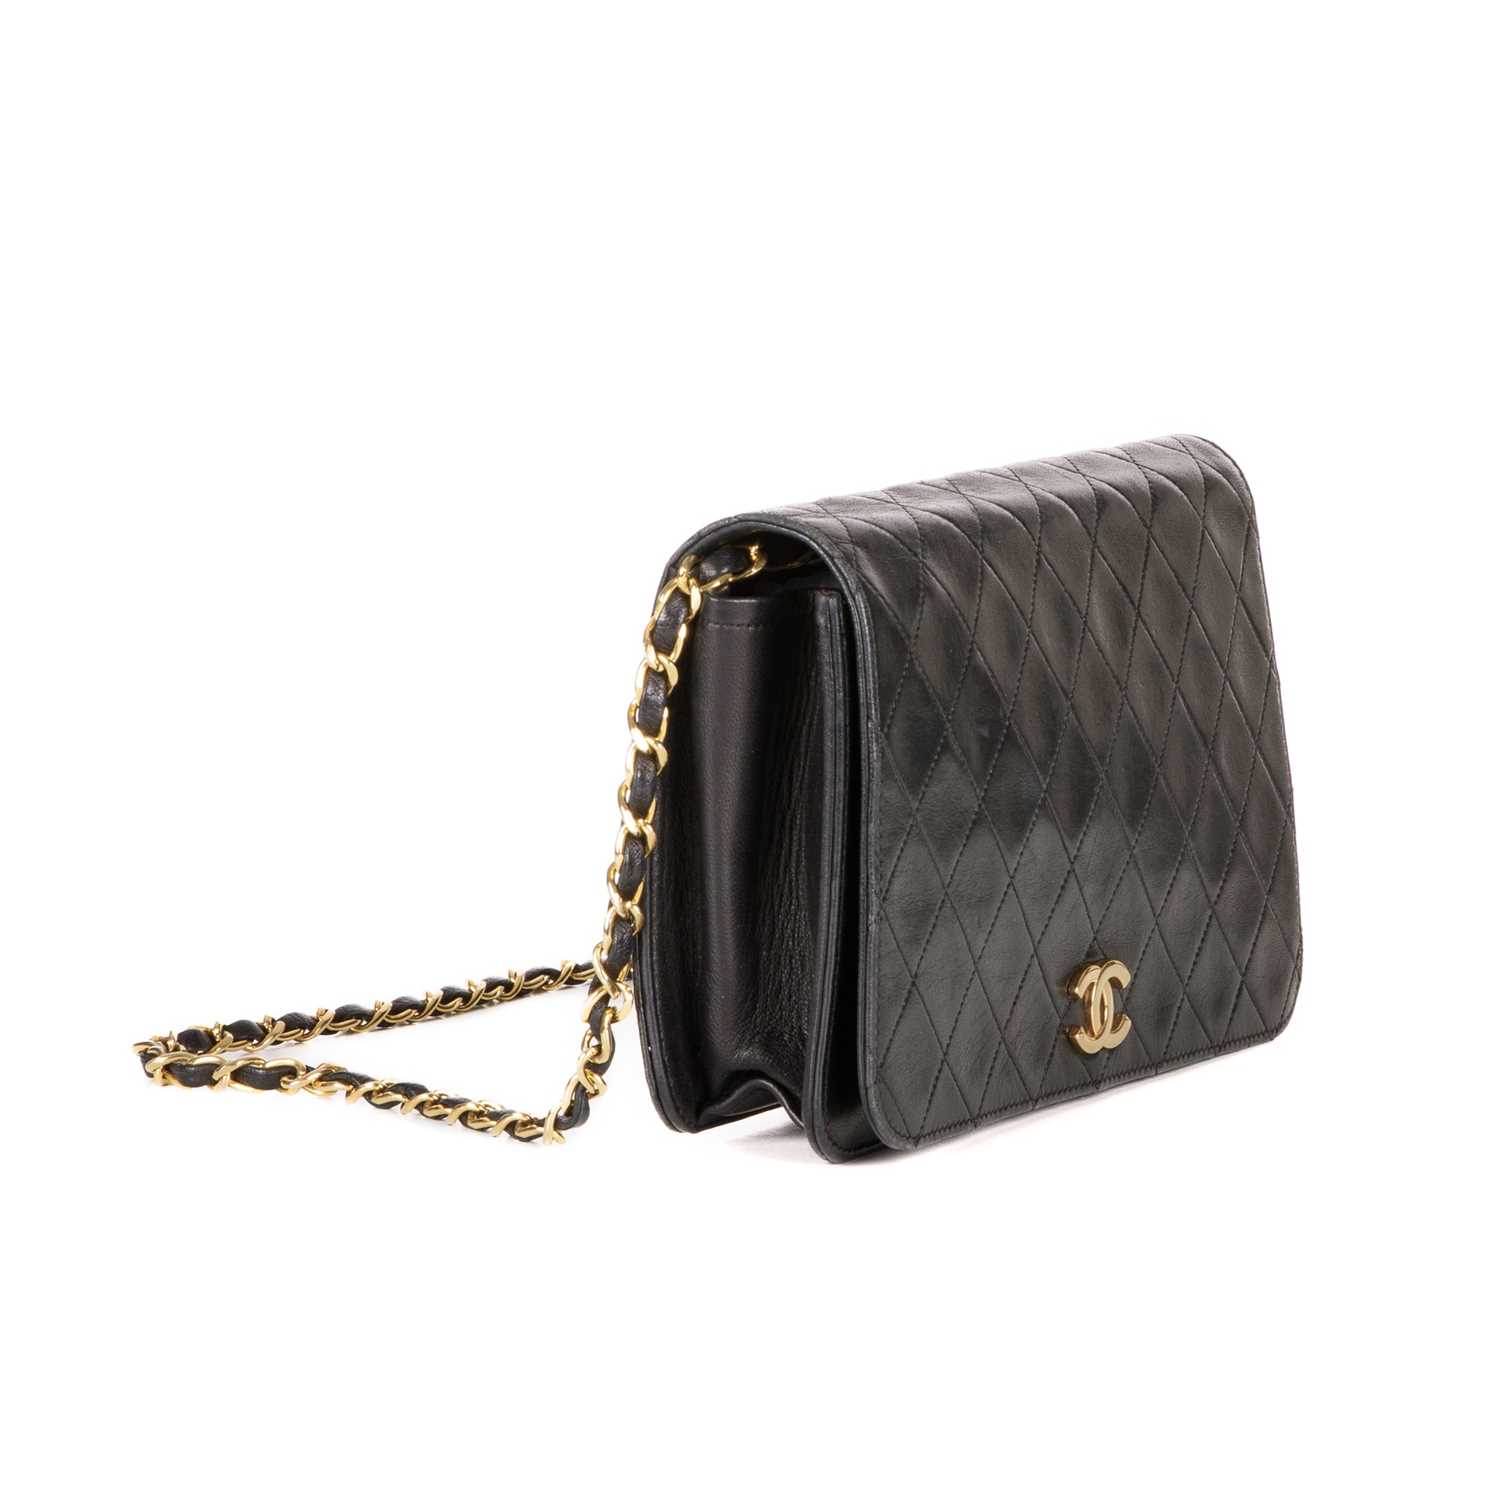 Chanel, a vintage CC Push Lock Full Flap handbag, designed with a diamond quilted black leather - Image 3 of 4